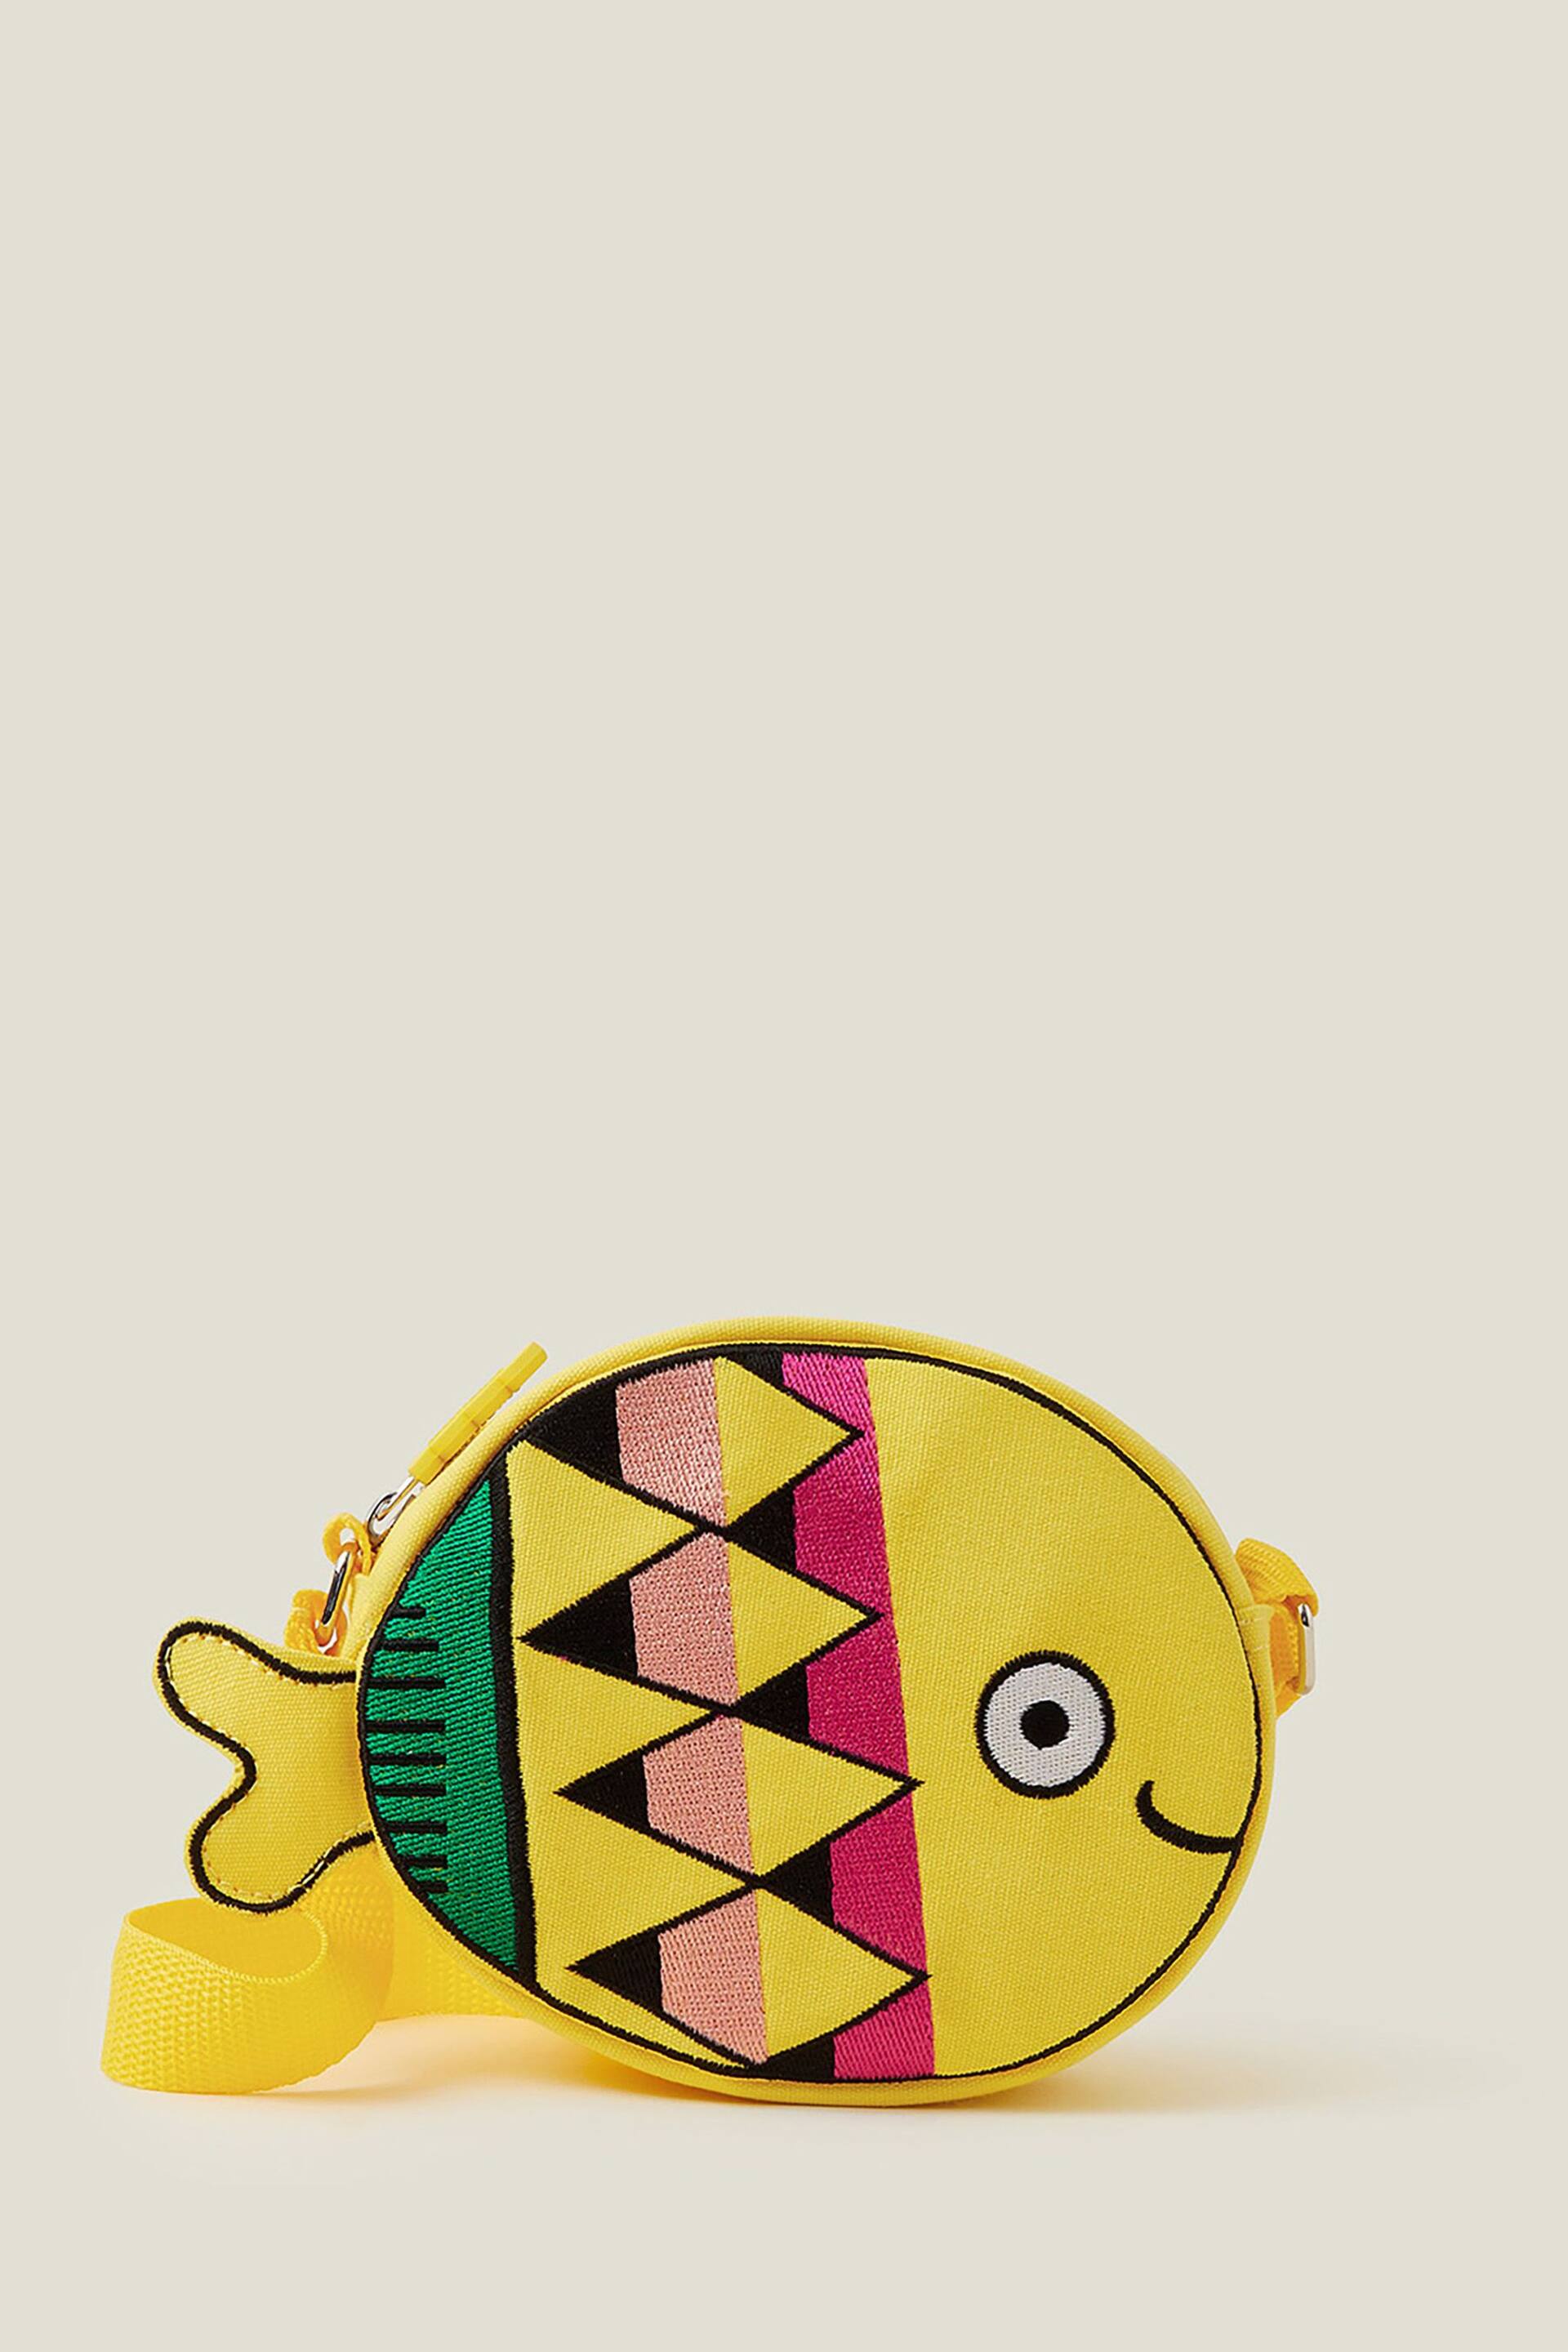 Accessorize Yellow Girls Fish Bag - Image 2 of 4